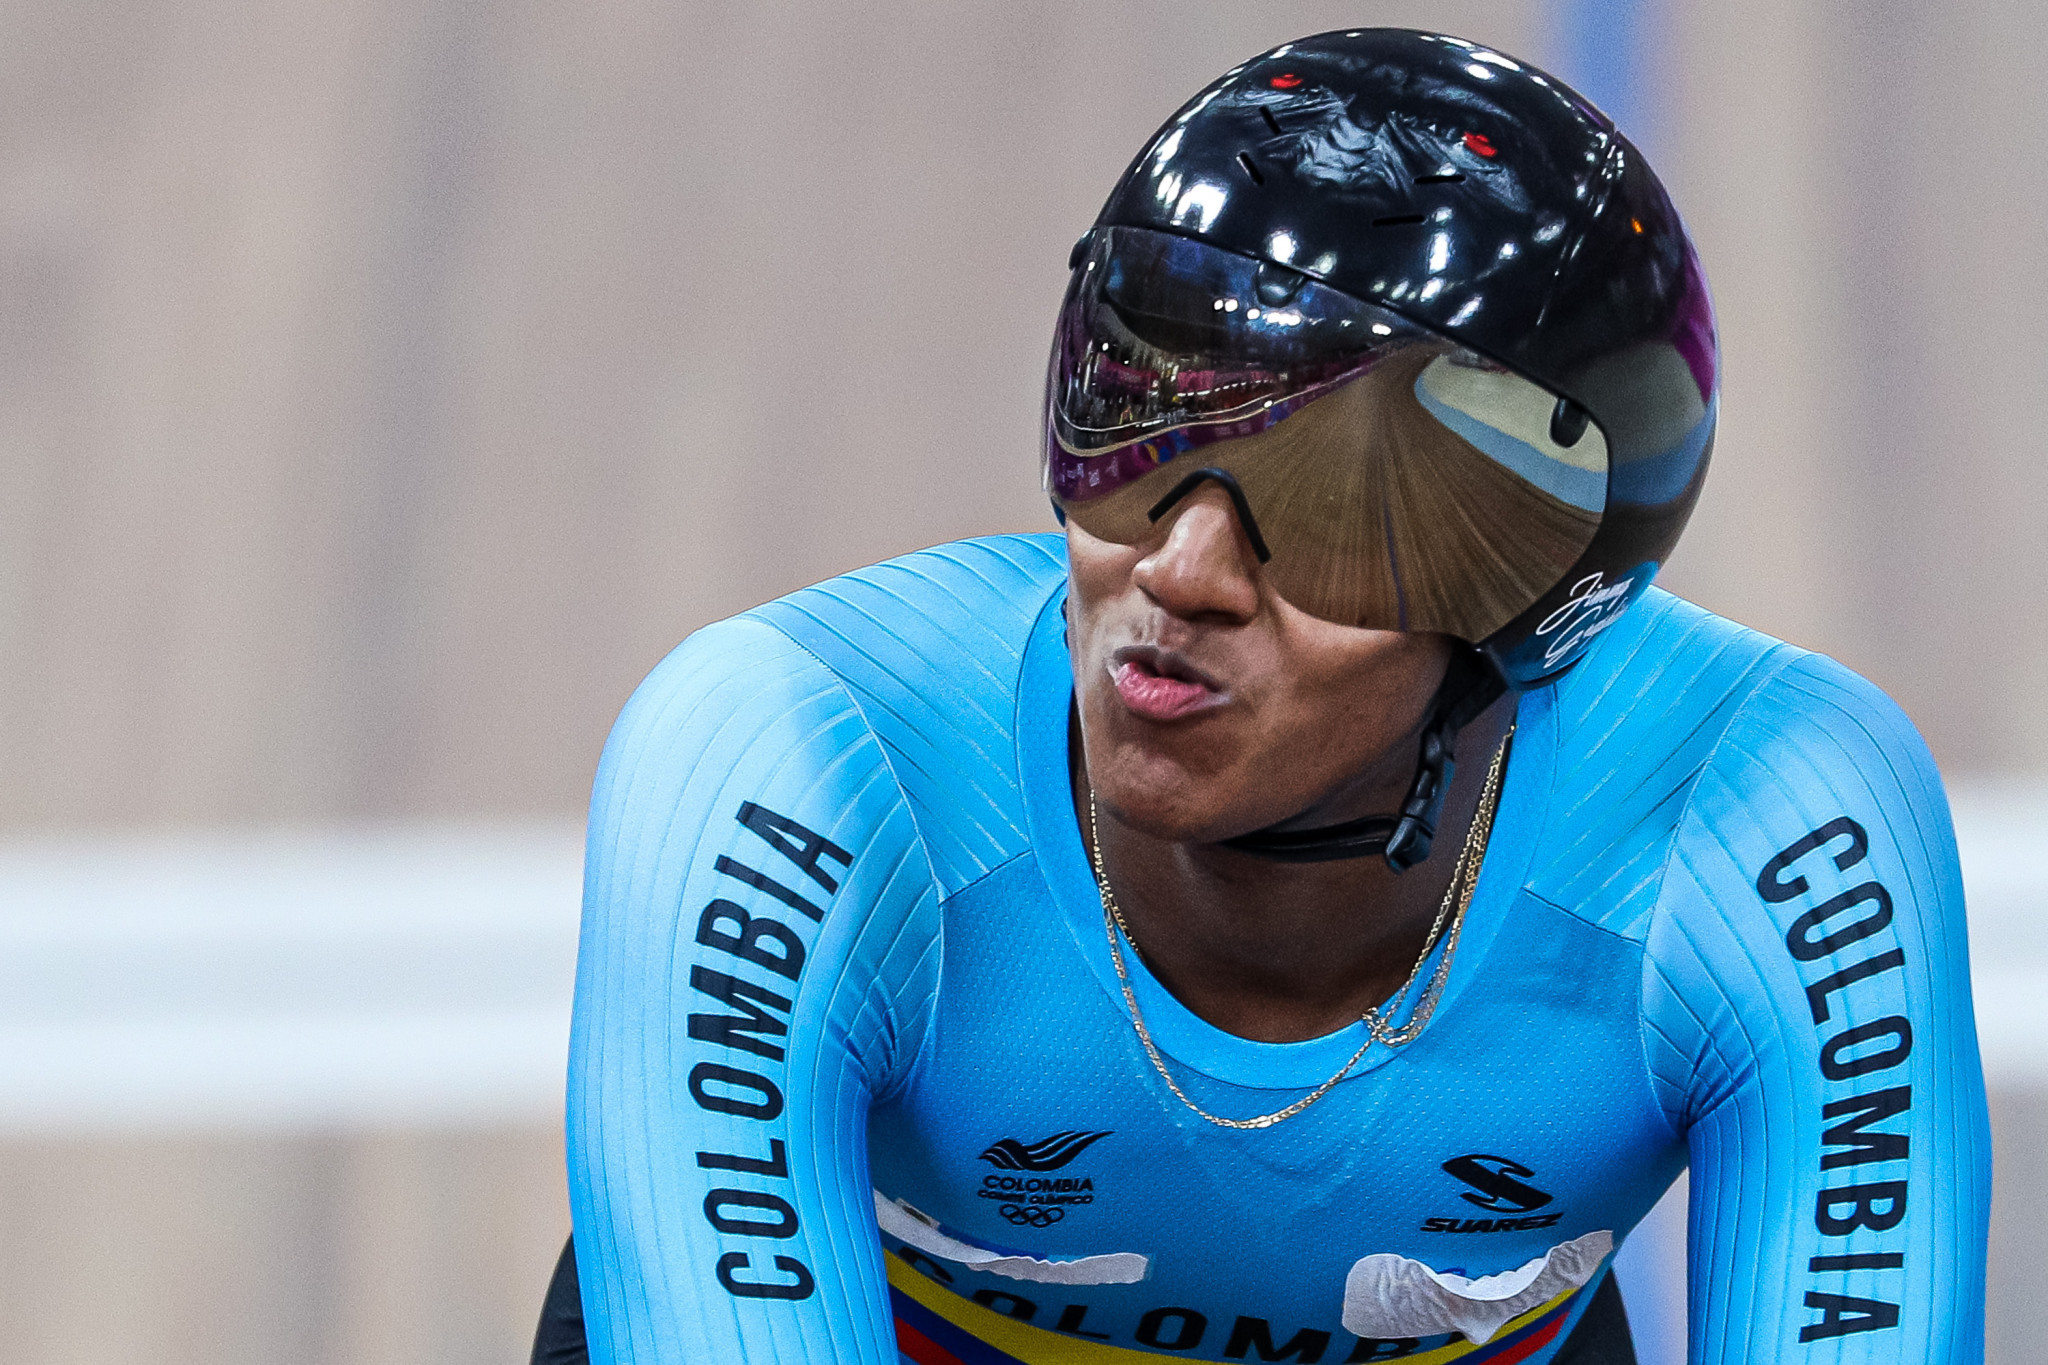 Kevin Quintero was part of Colombia's victorious men's team sprint squad ©Getty Images